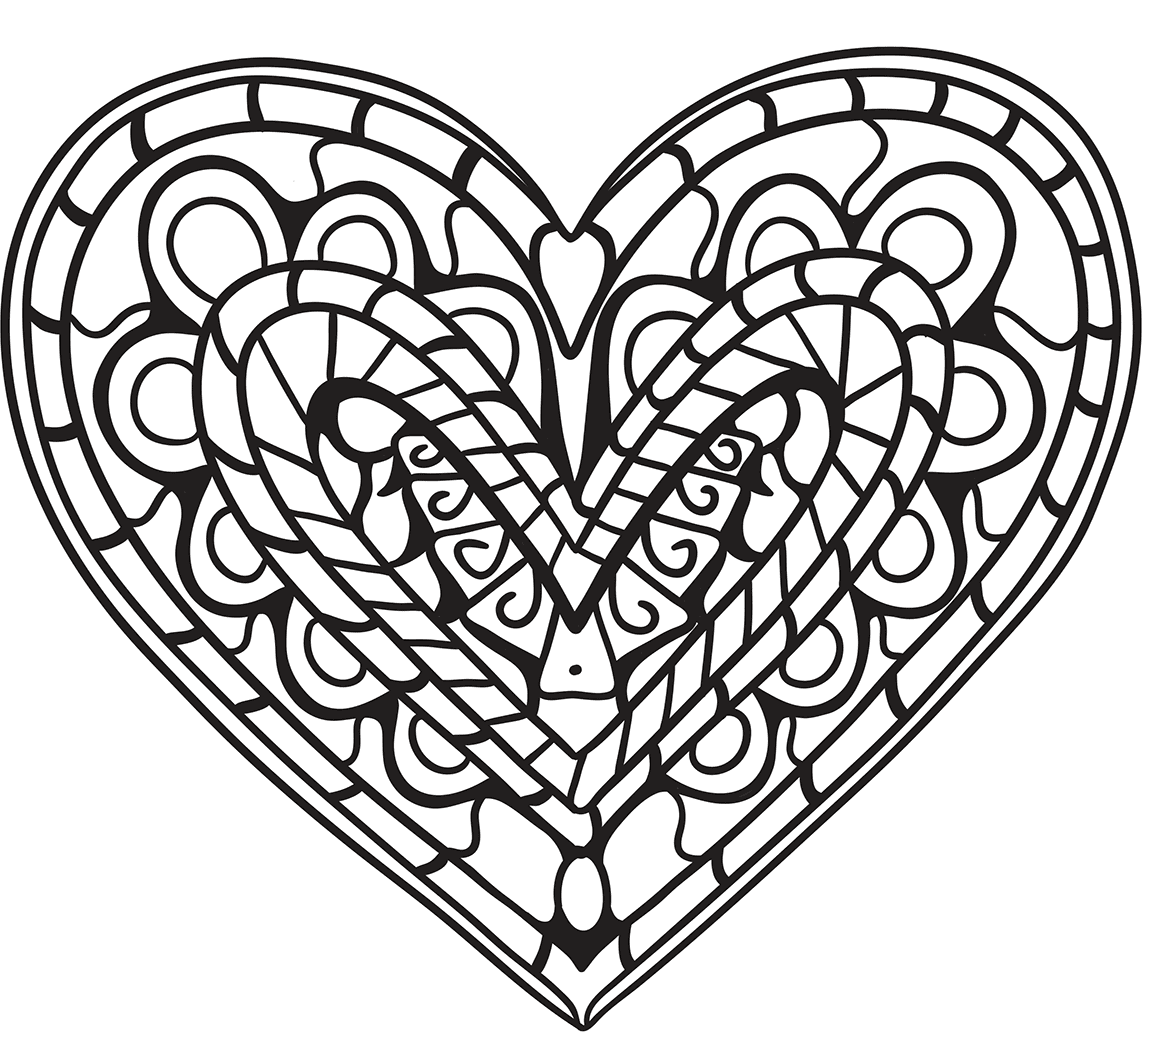 Heart Zentangle Coloring Page